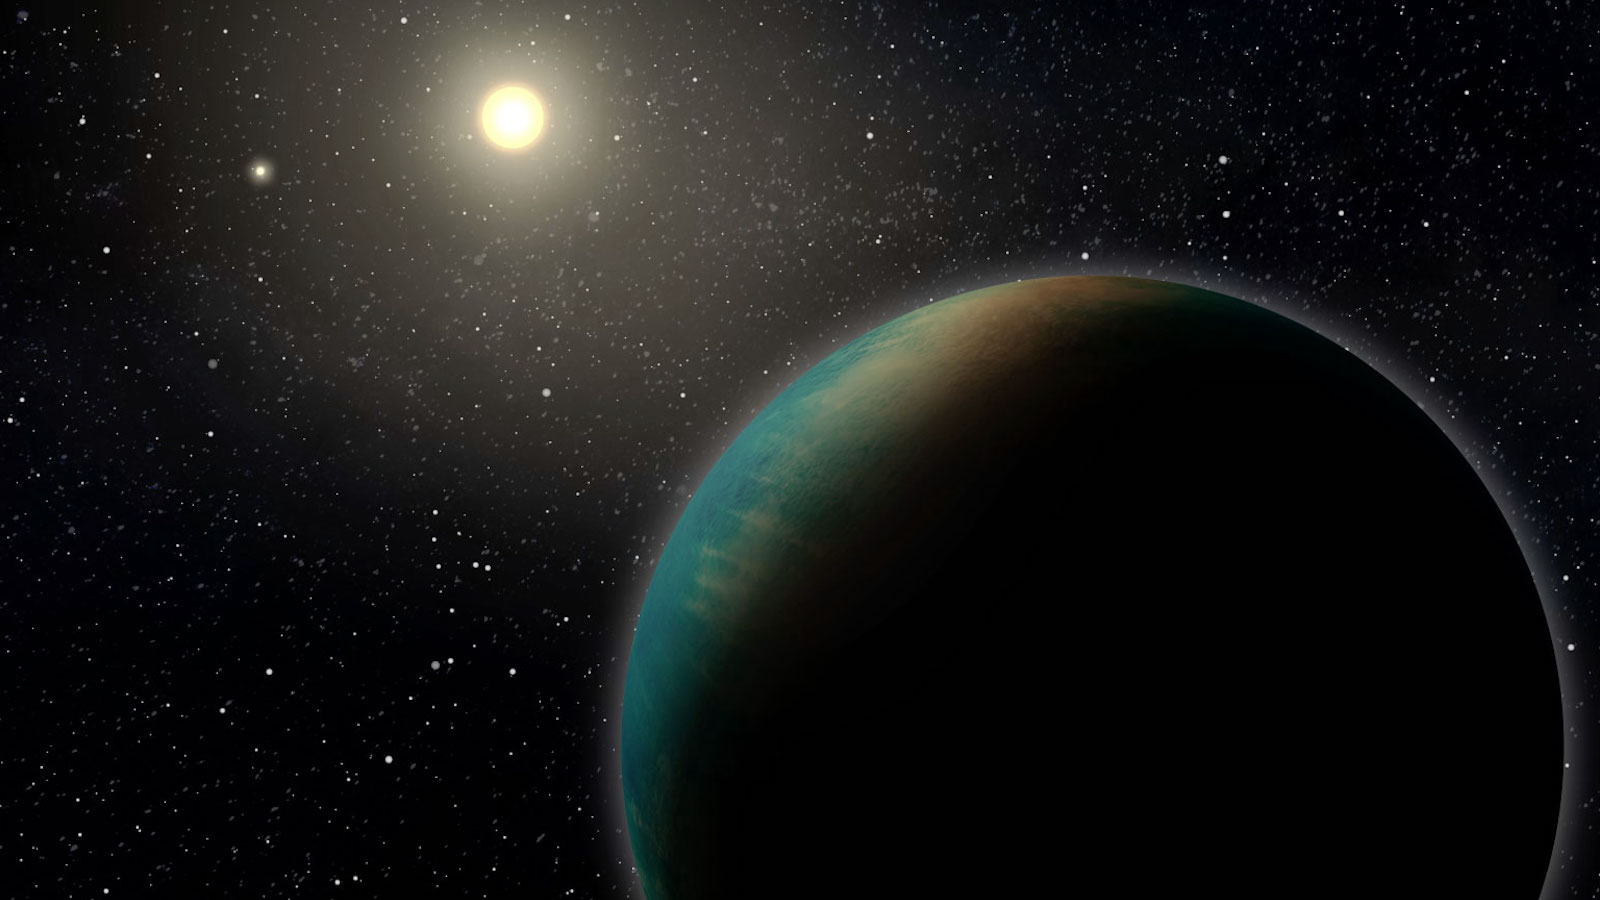 slide 5 - Artist's rendering of planet TOI-1452 b, as it might appear from space if it turns out to be an ocean world.